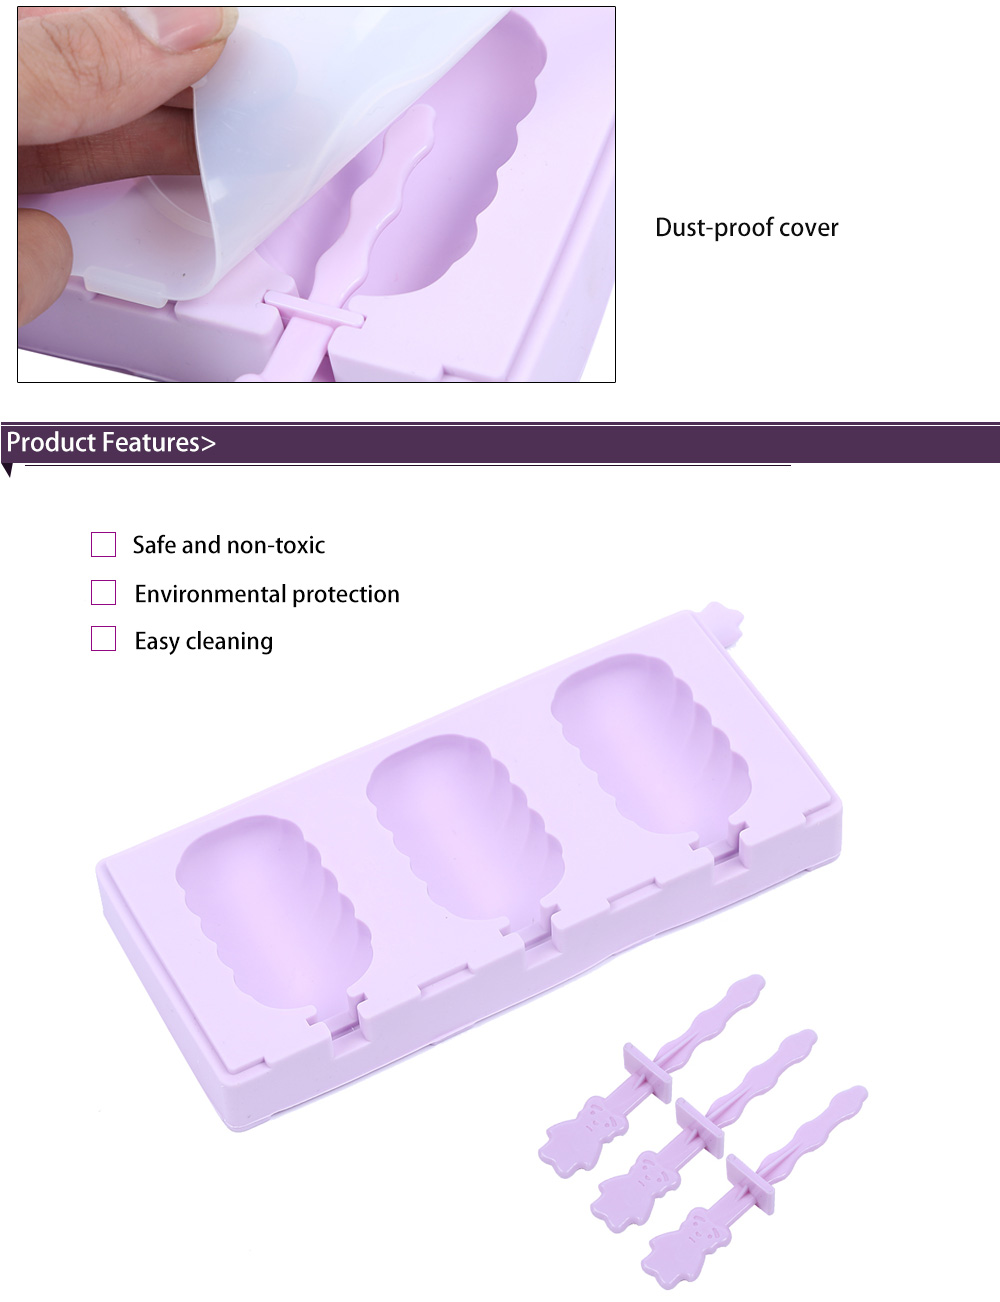 TinB DIY Silicone Ice Cream Mold with Dust Cover